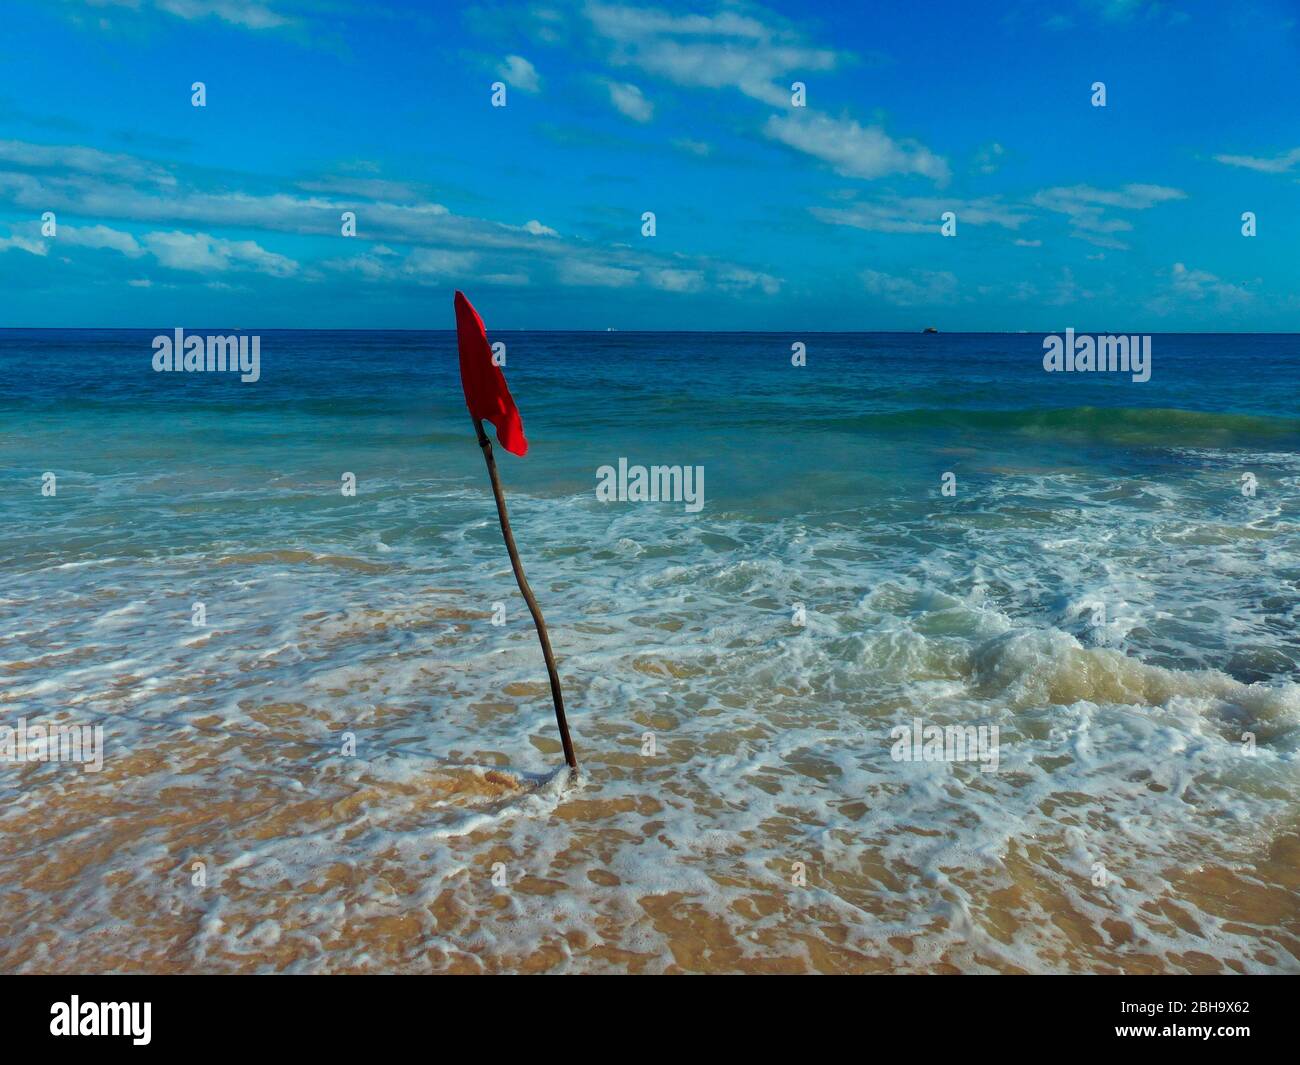 Red flag, placed by life guard, indicates danger. No swimmers should enter the water. Stock Photo